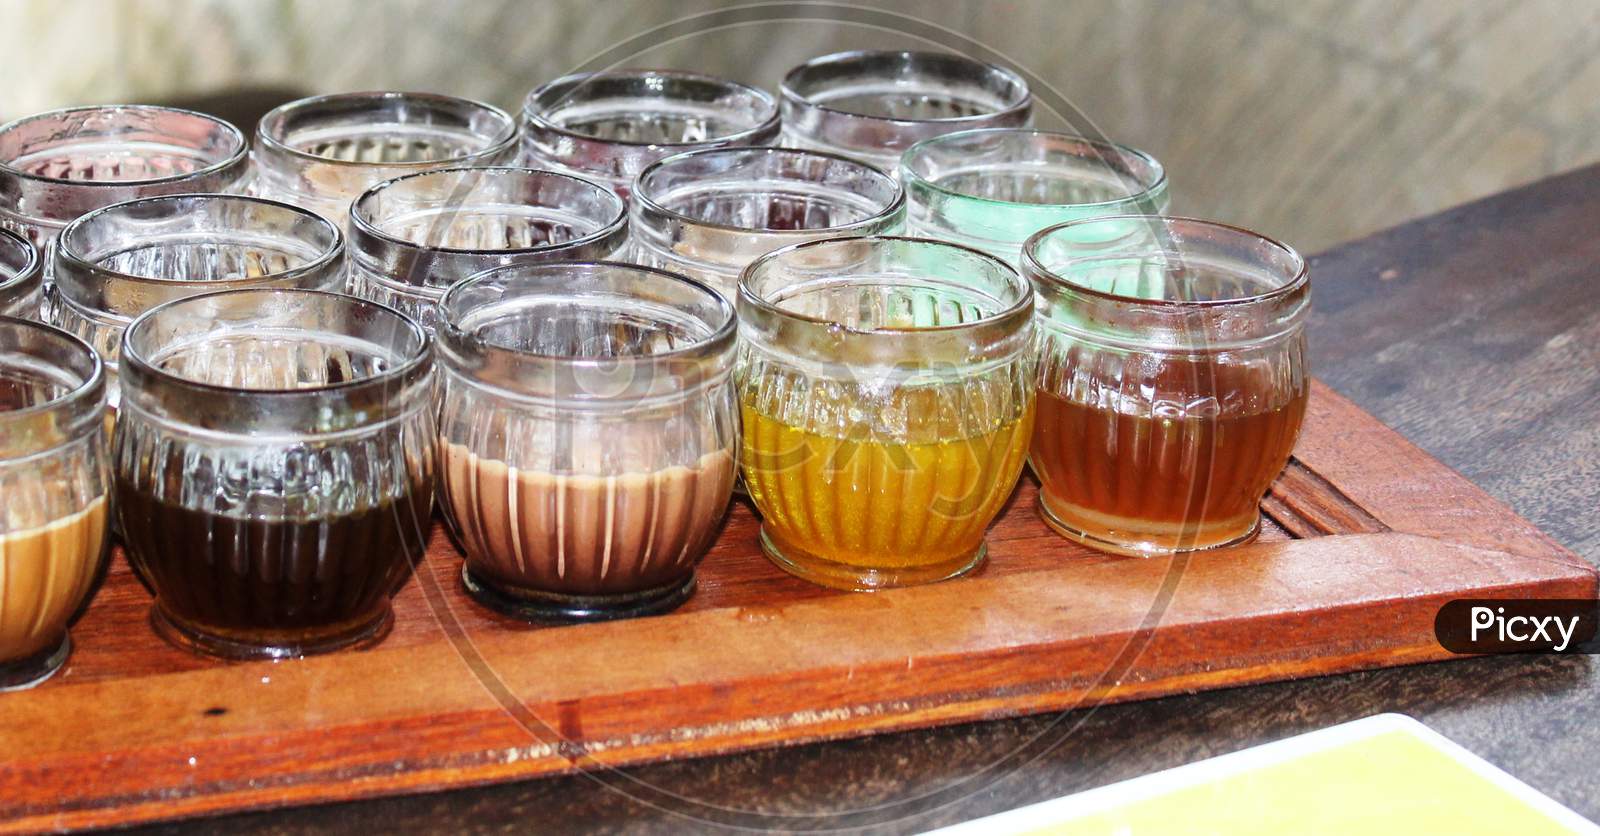 Tea in cups, India's most common and popular drink